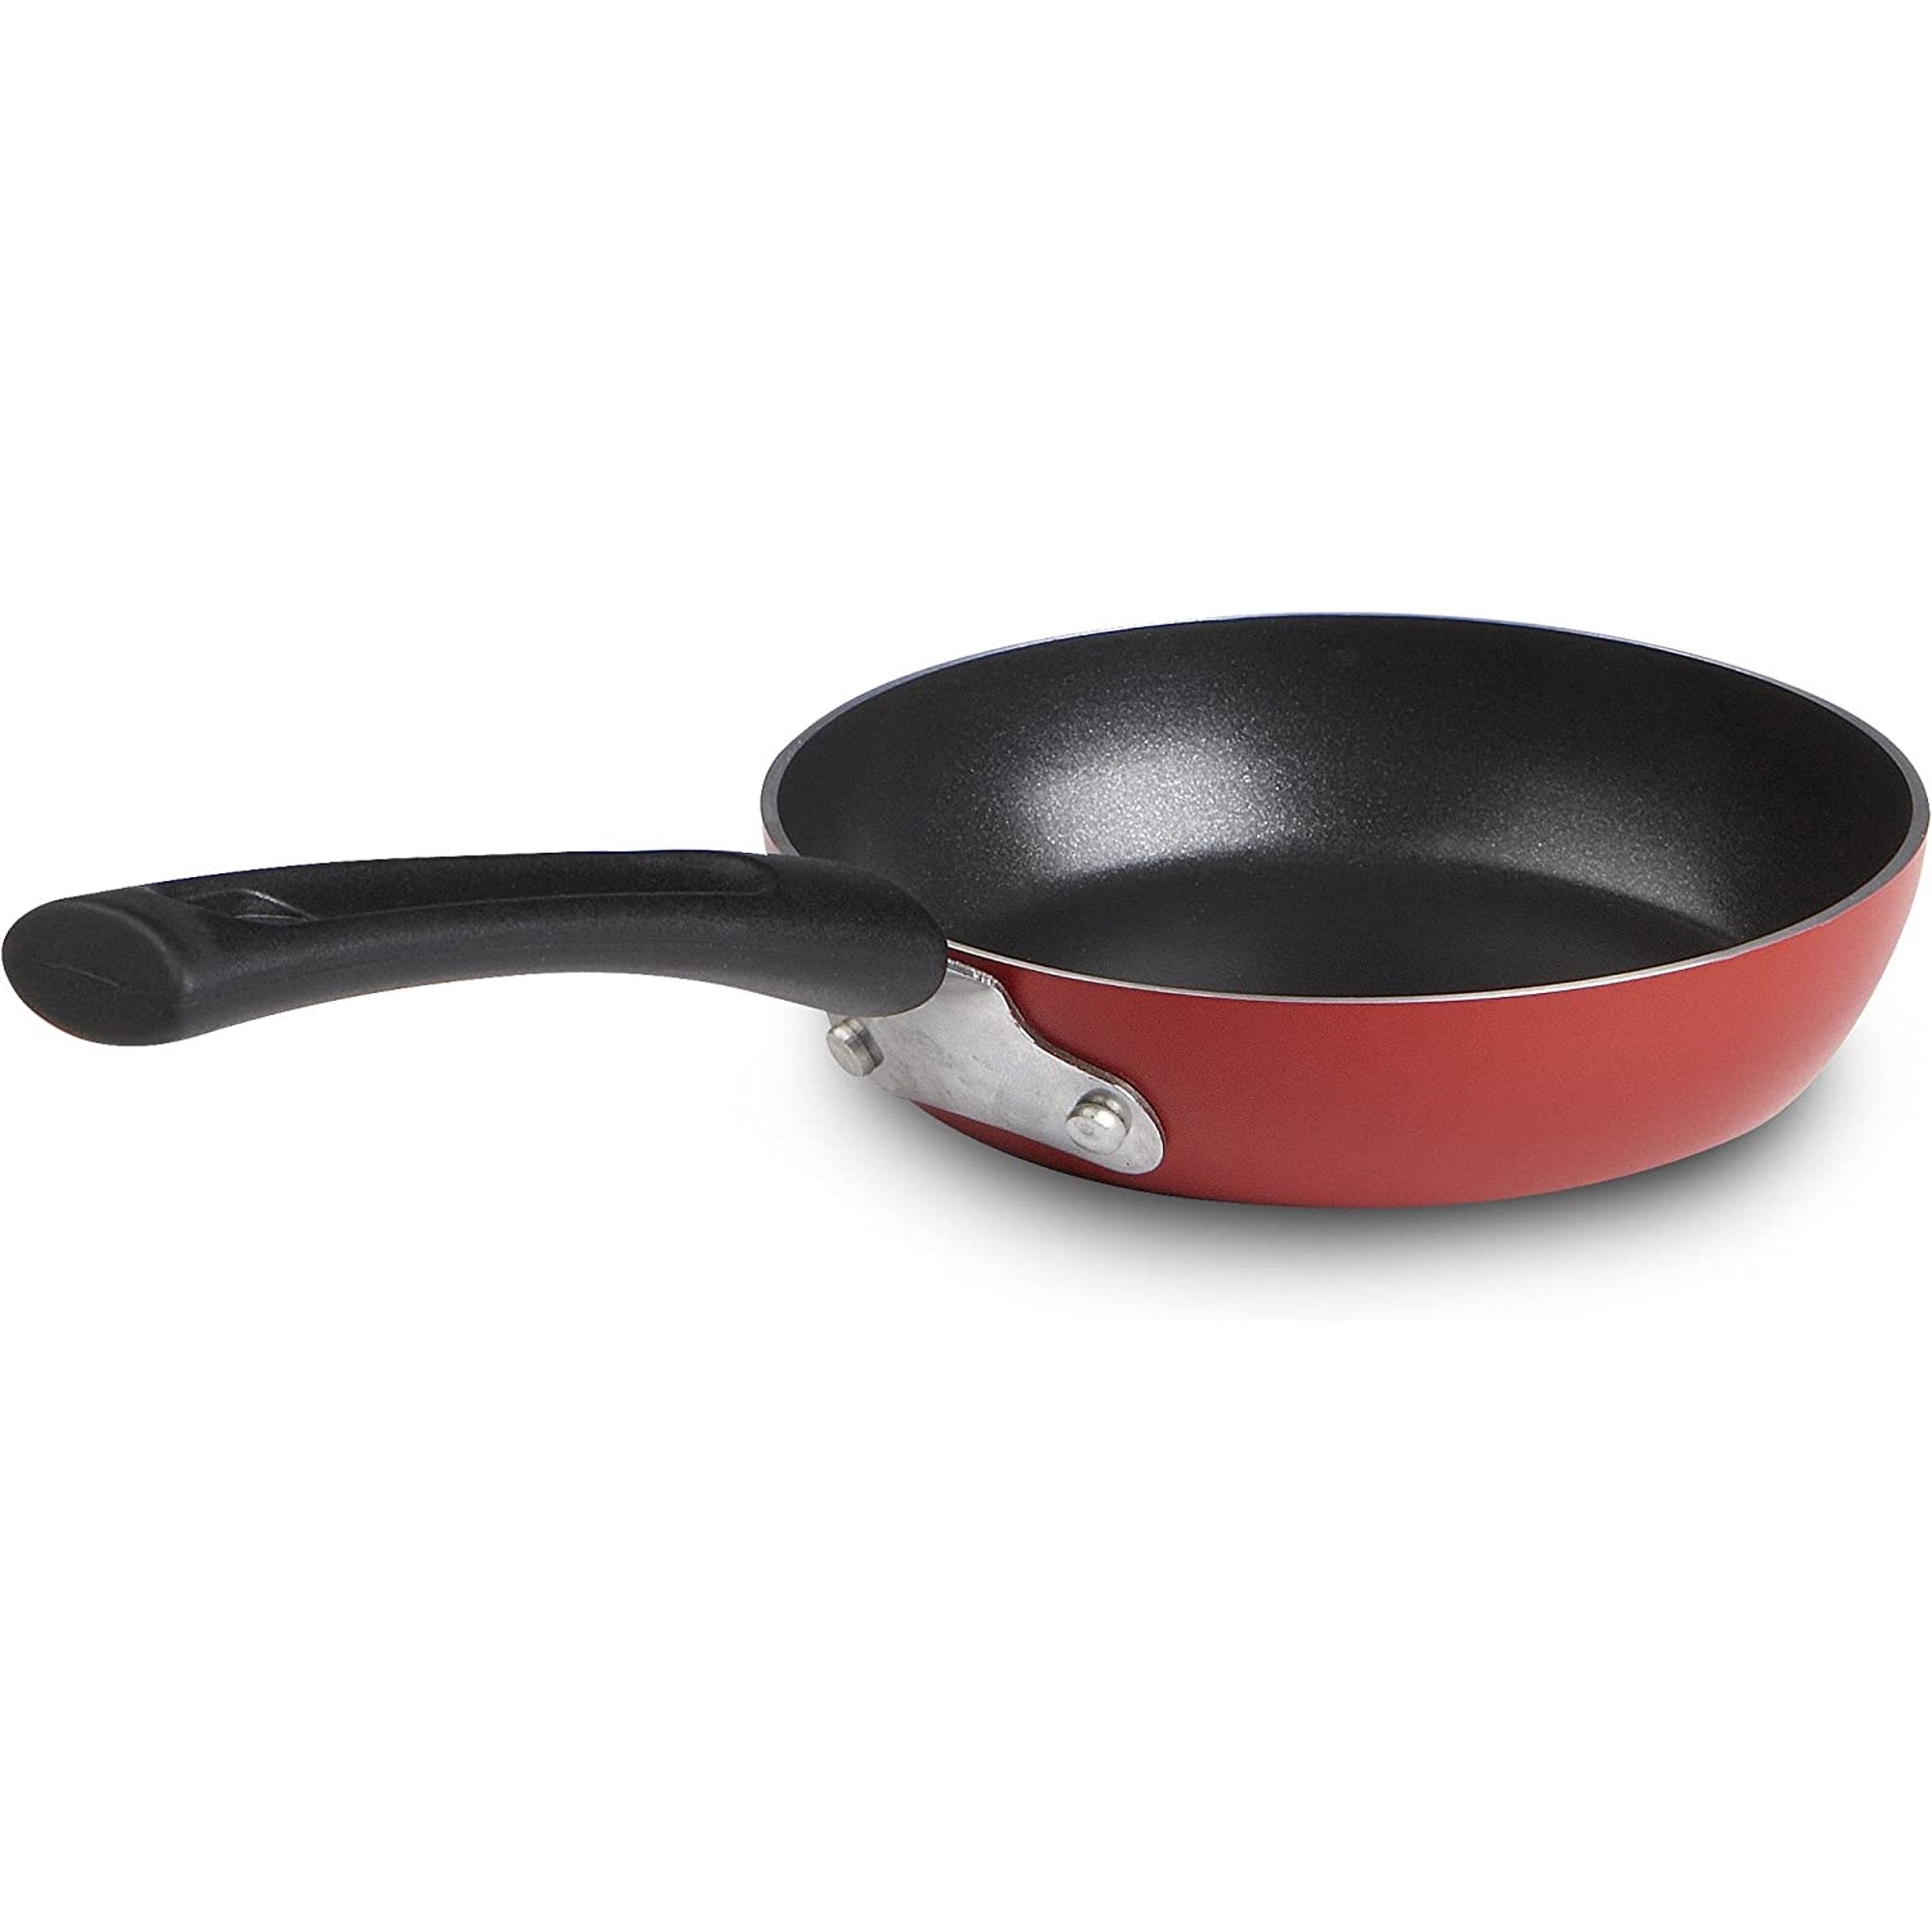 T-fal Specialty Nonstick Oven Safe Jumbo Cooker Saute Pan With